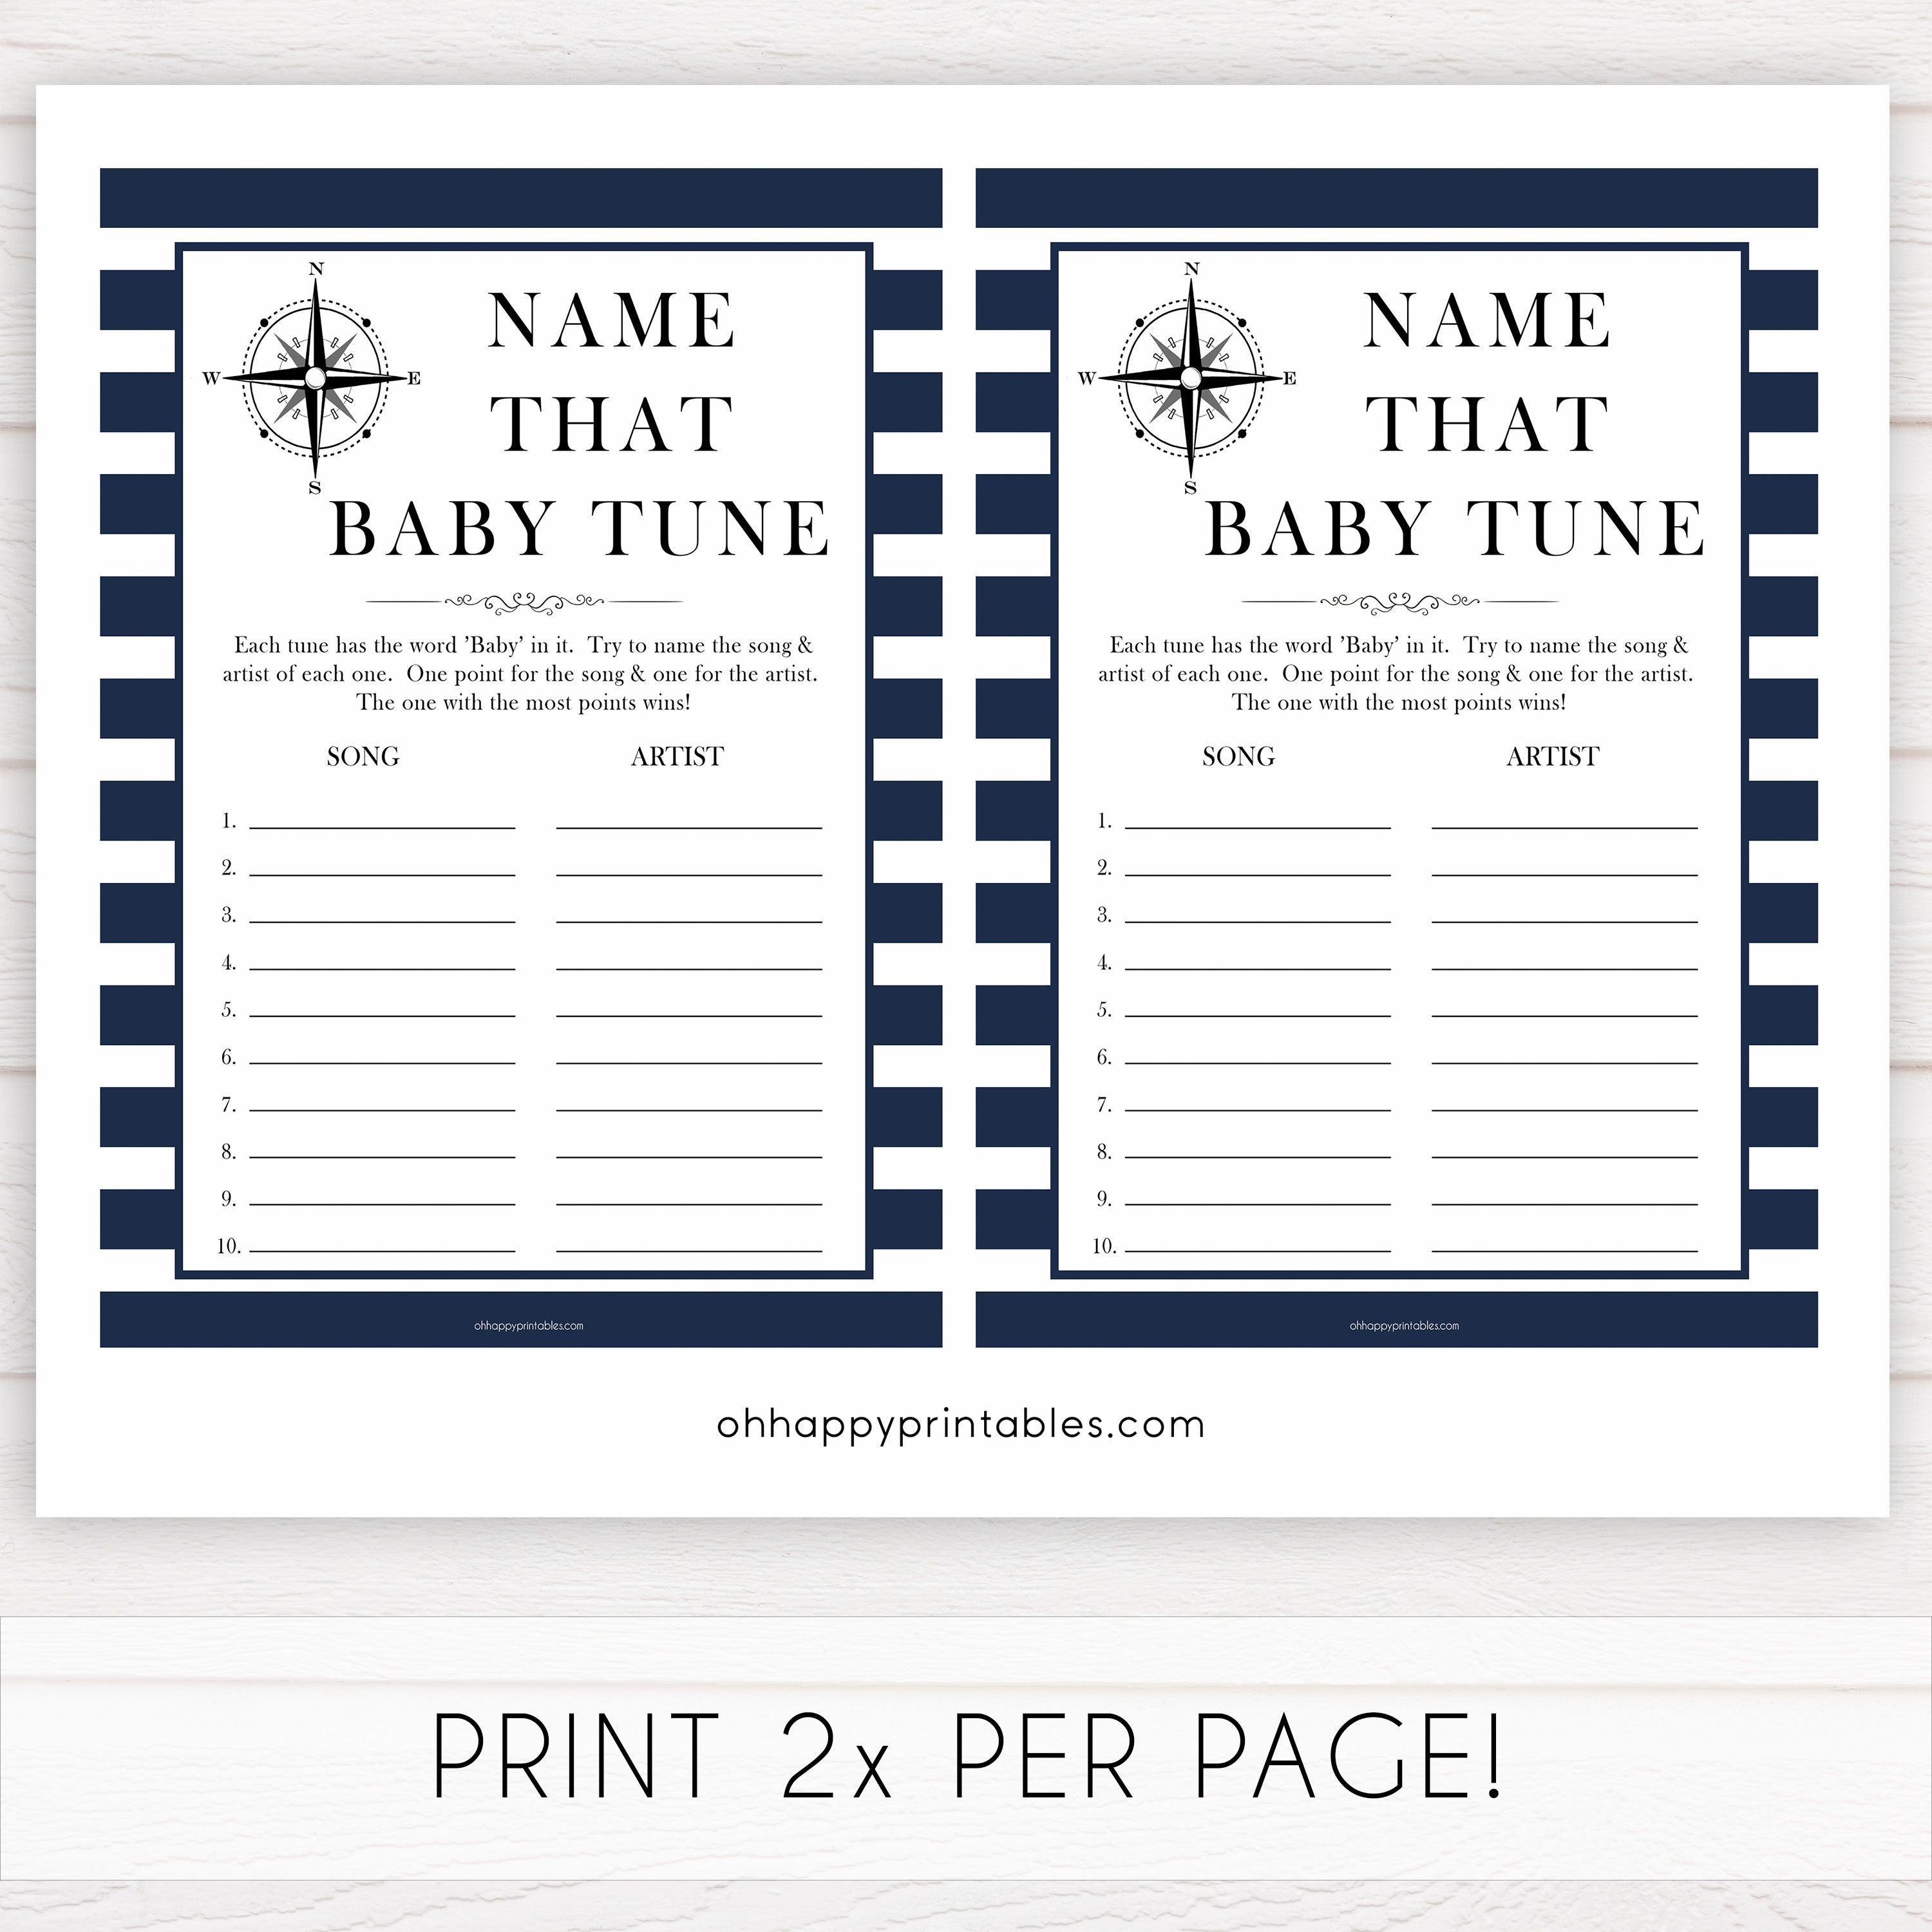 Nautical baby shower games, name that baby tune baby shower games, printable baby shower games, baby shower games, fun baby games, ahoy its a boy, popular baby shower games, sailor baby games, boat baby games